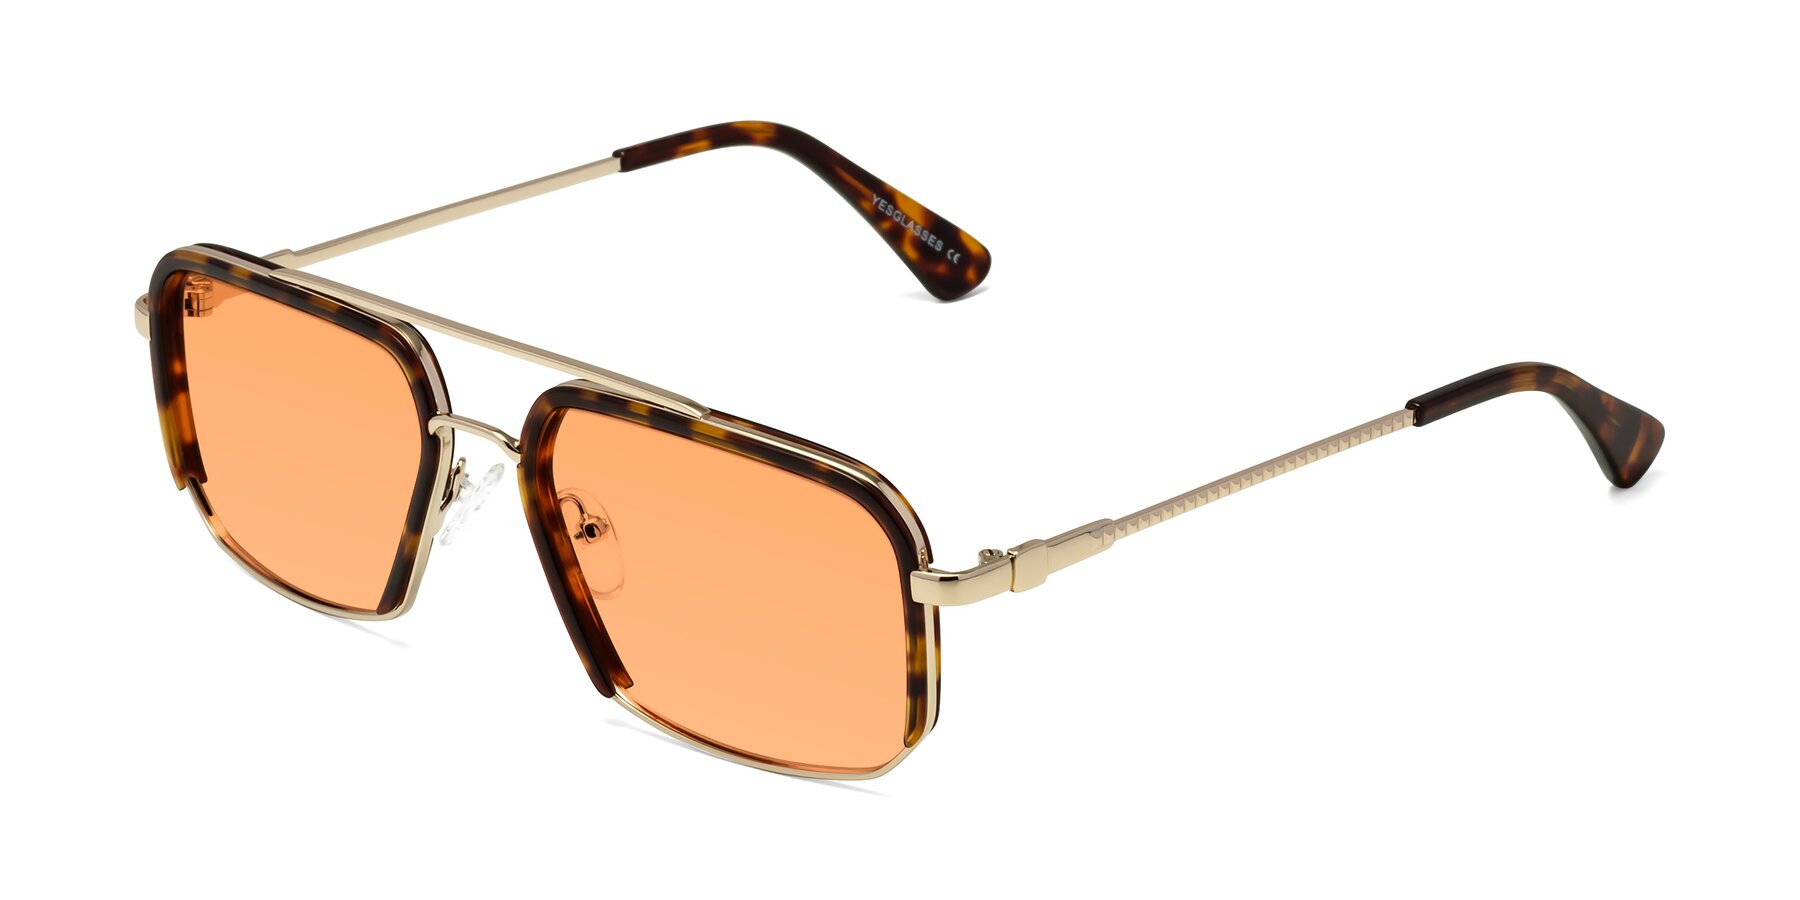 Angle of Dechter in Tortoise-Gold with Medium Orange Tinted Lenses